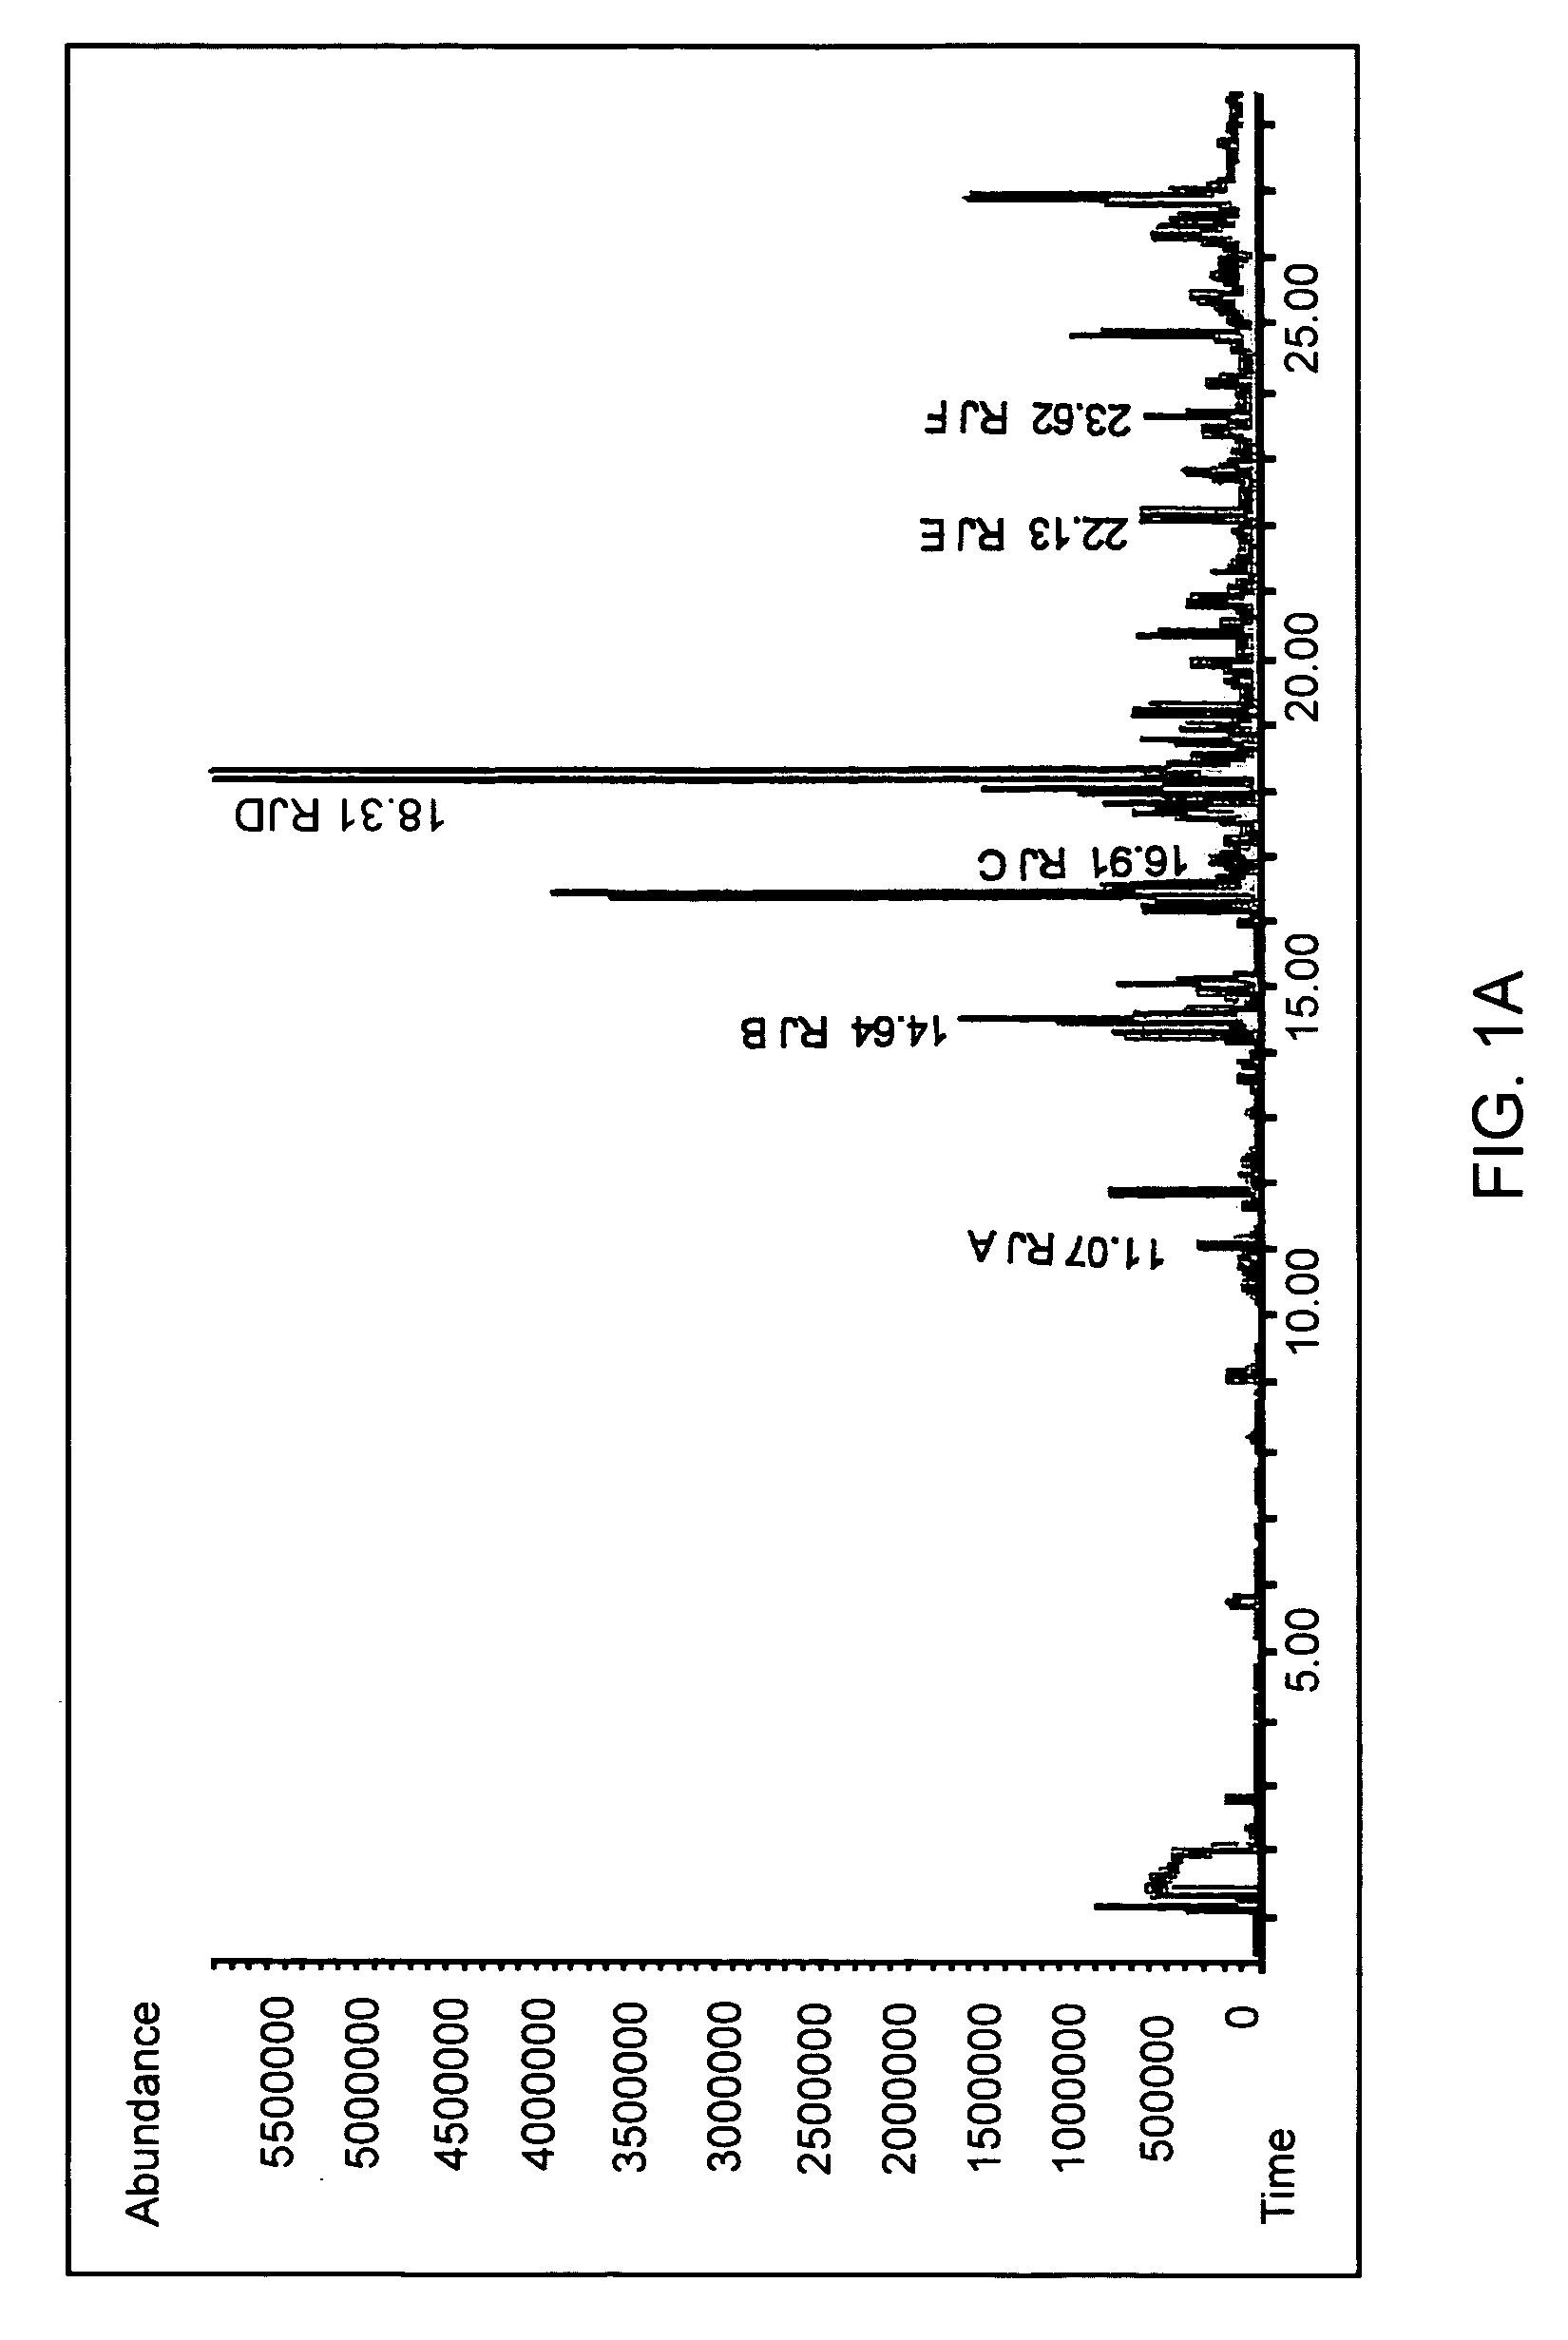 Detection of disease by analysis of emissions